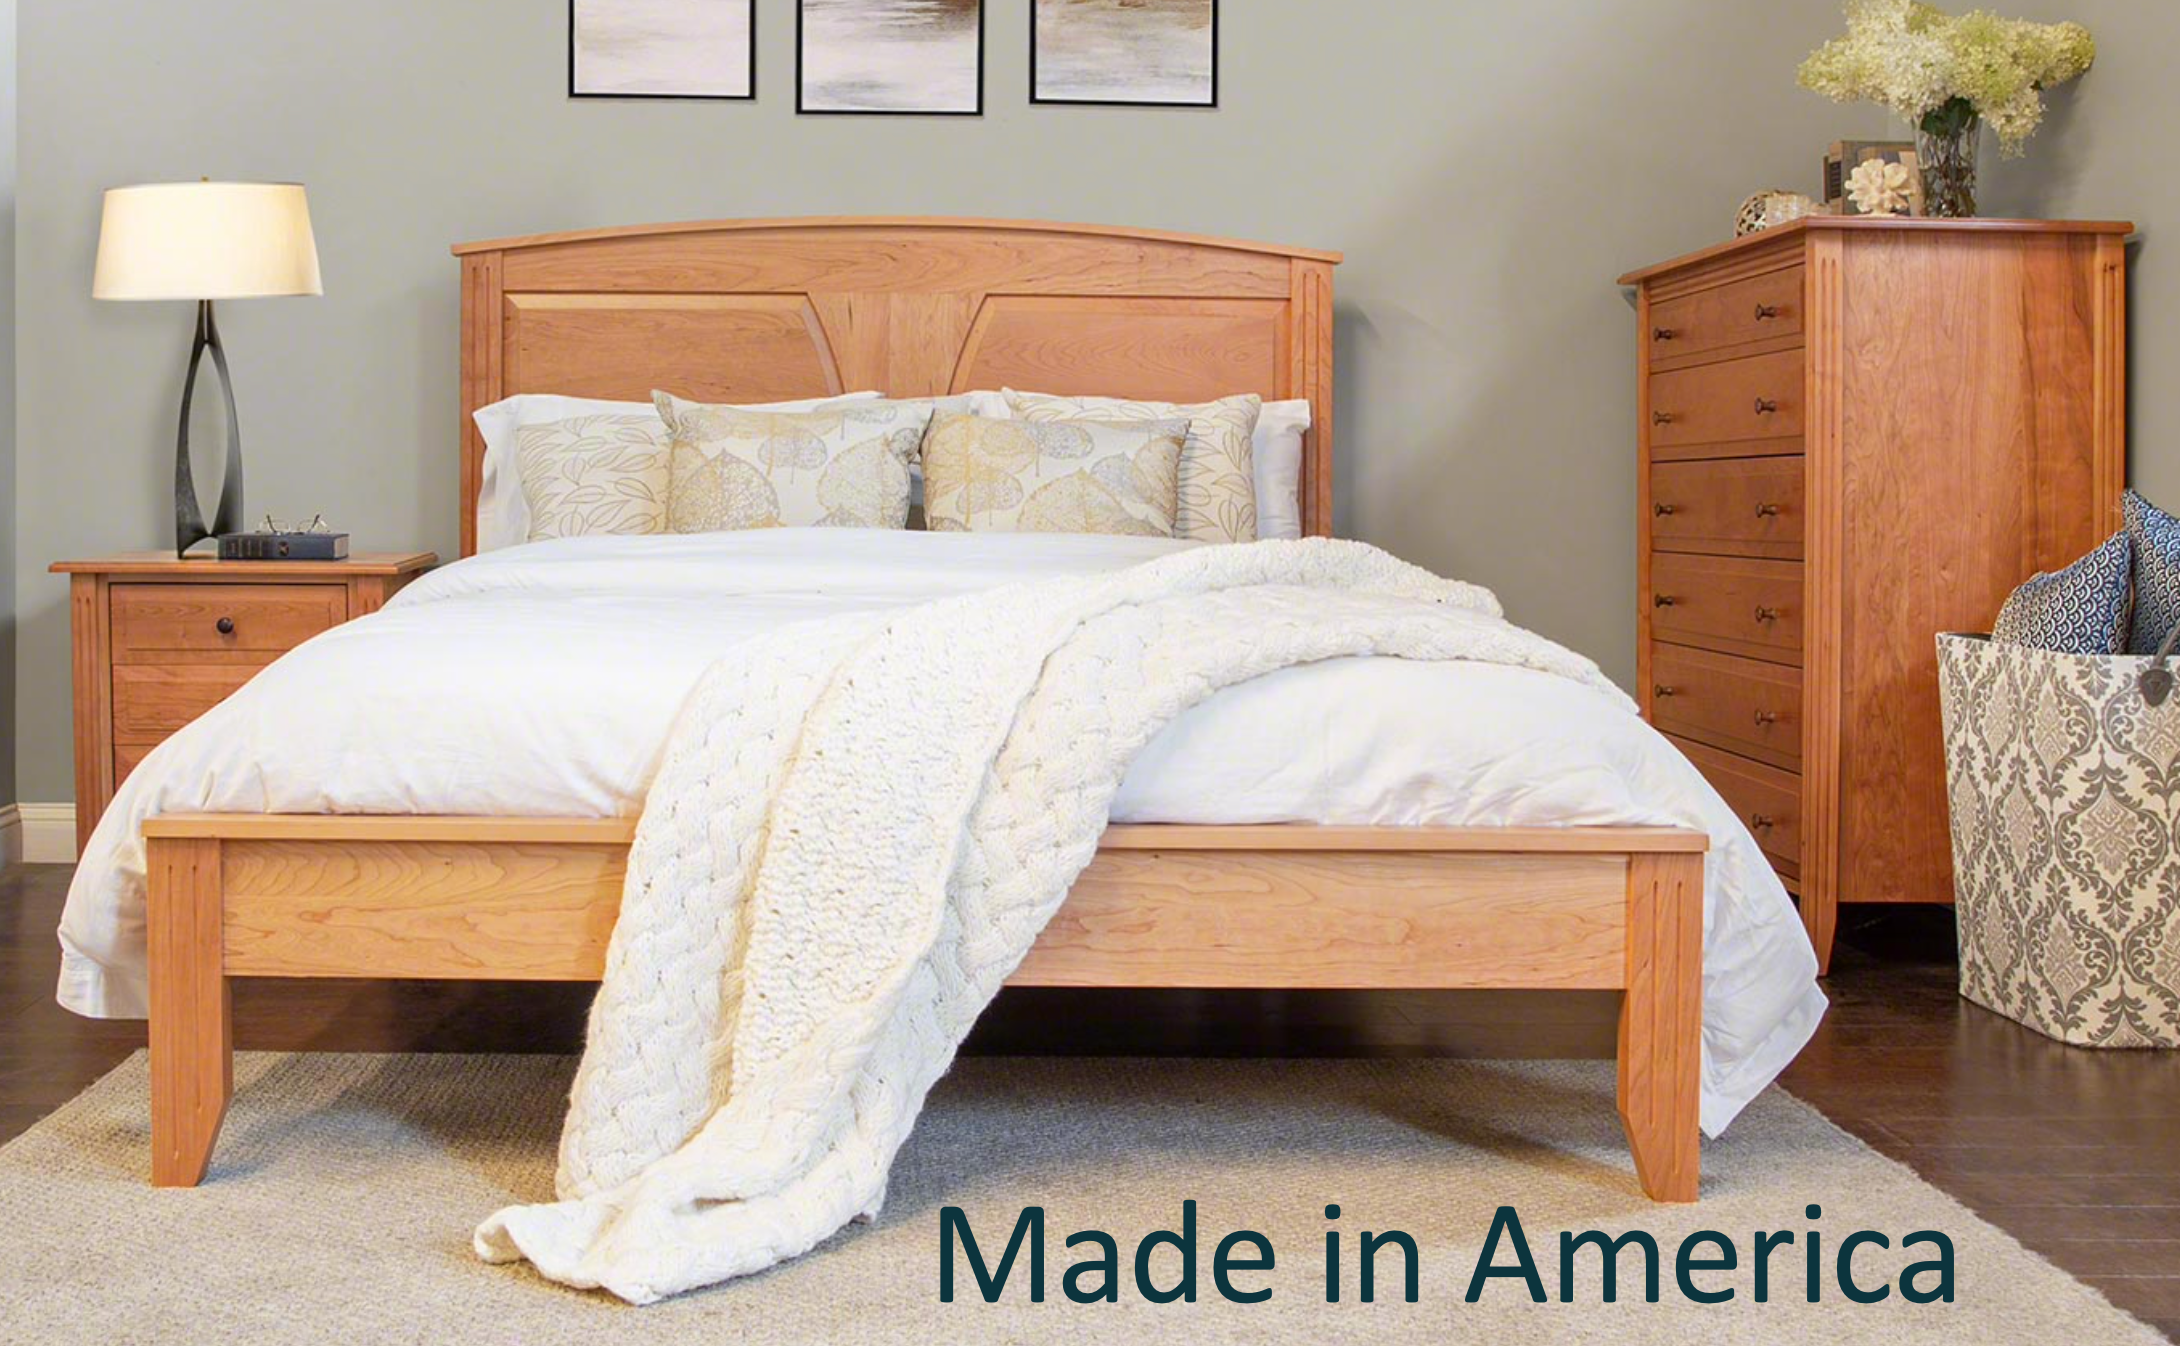 American Made Furniture from Vermont | Make the World a Better Place